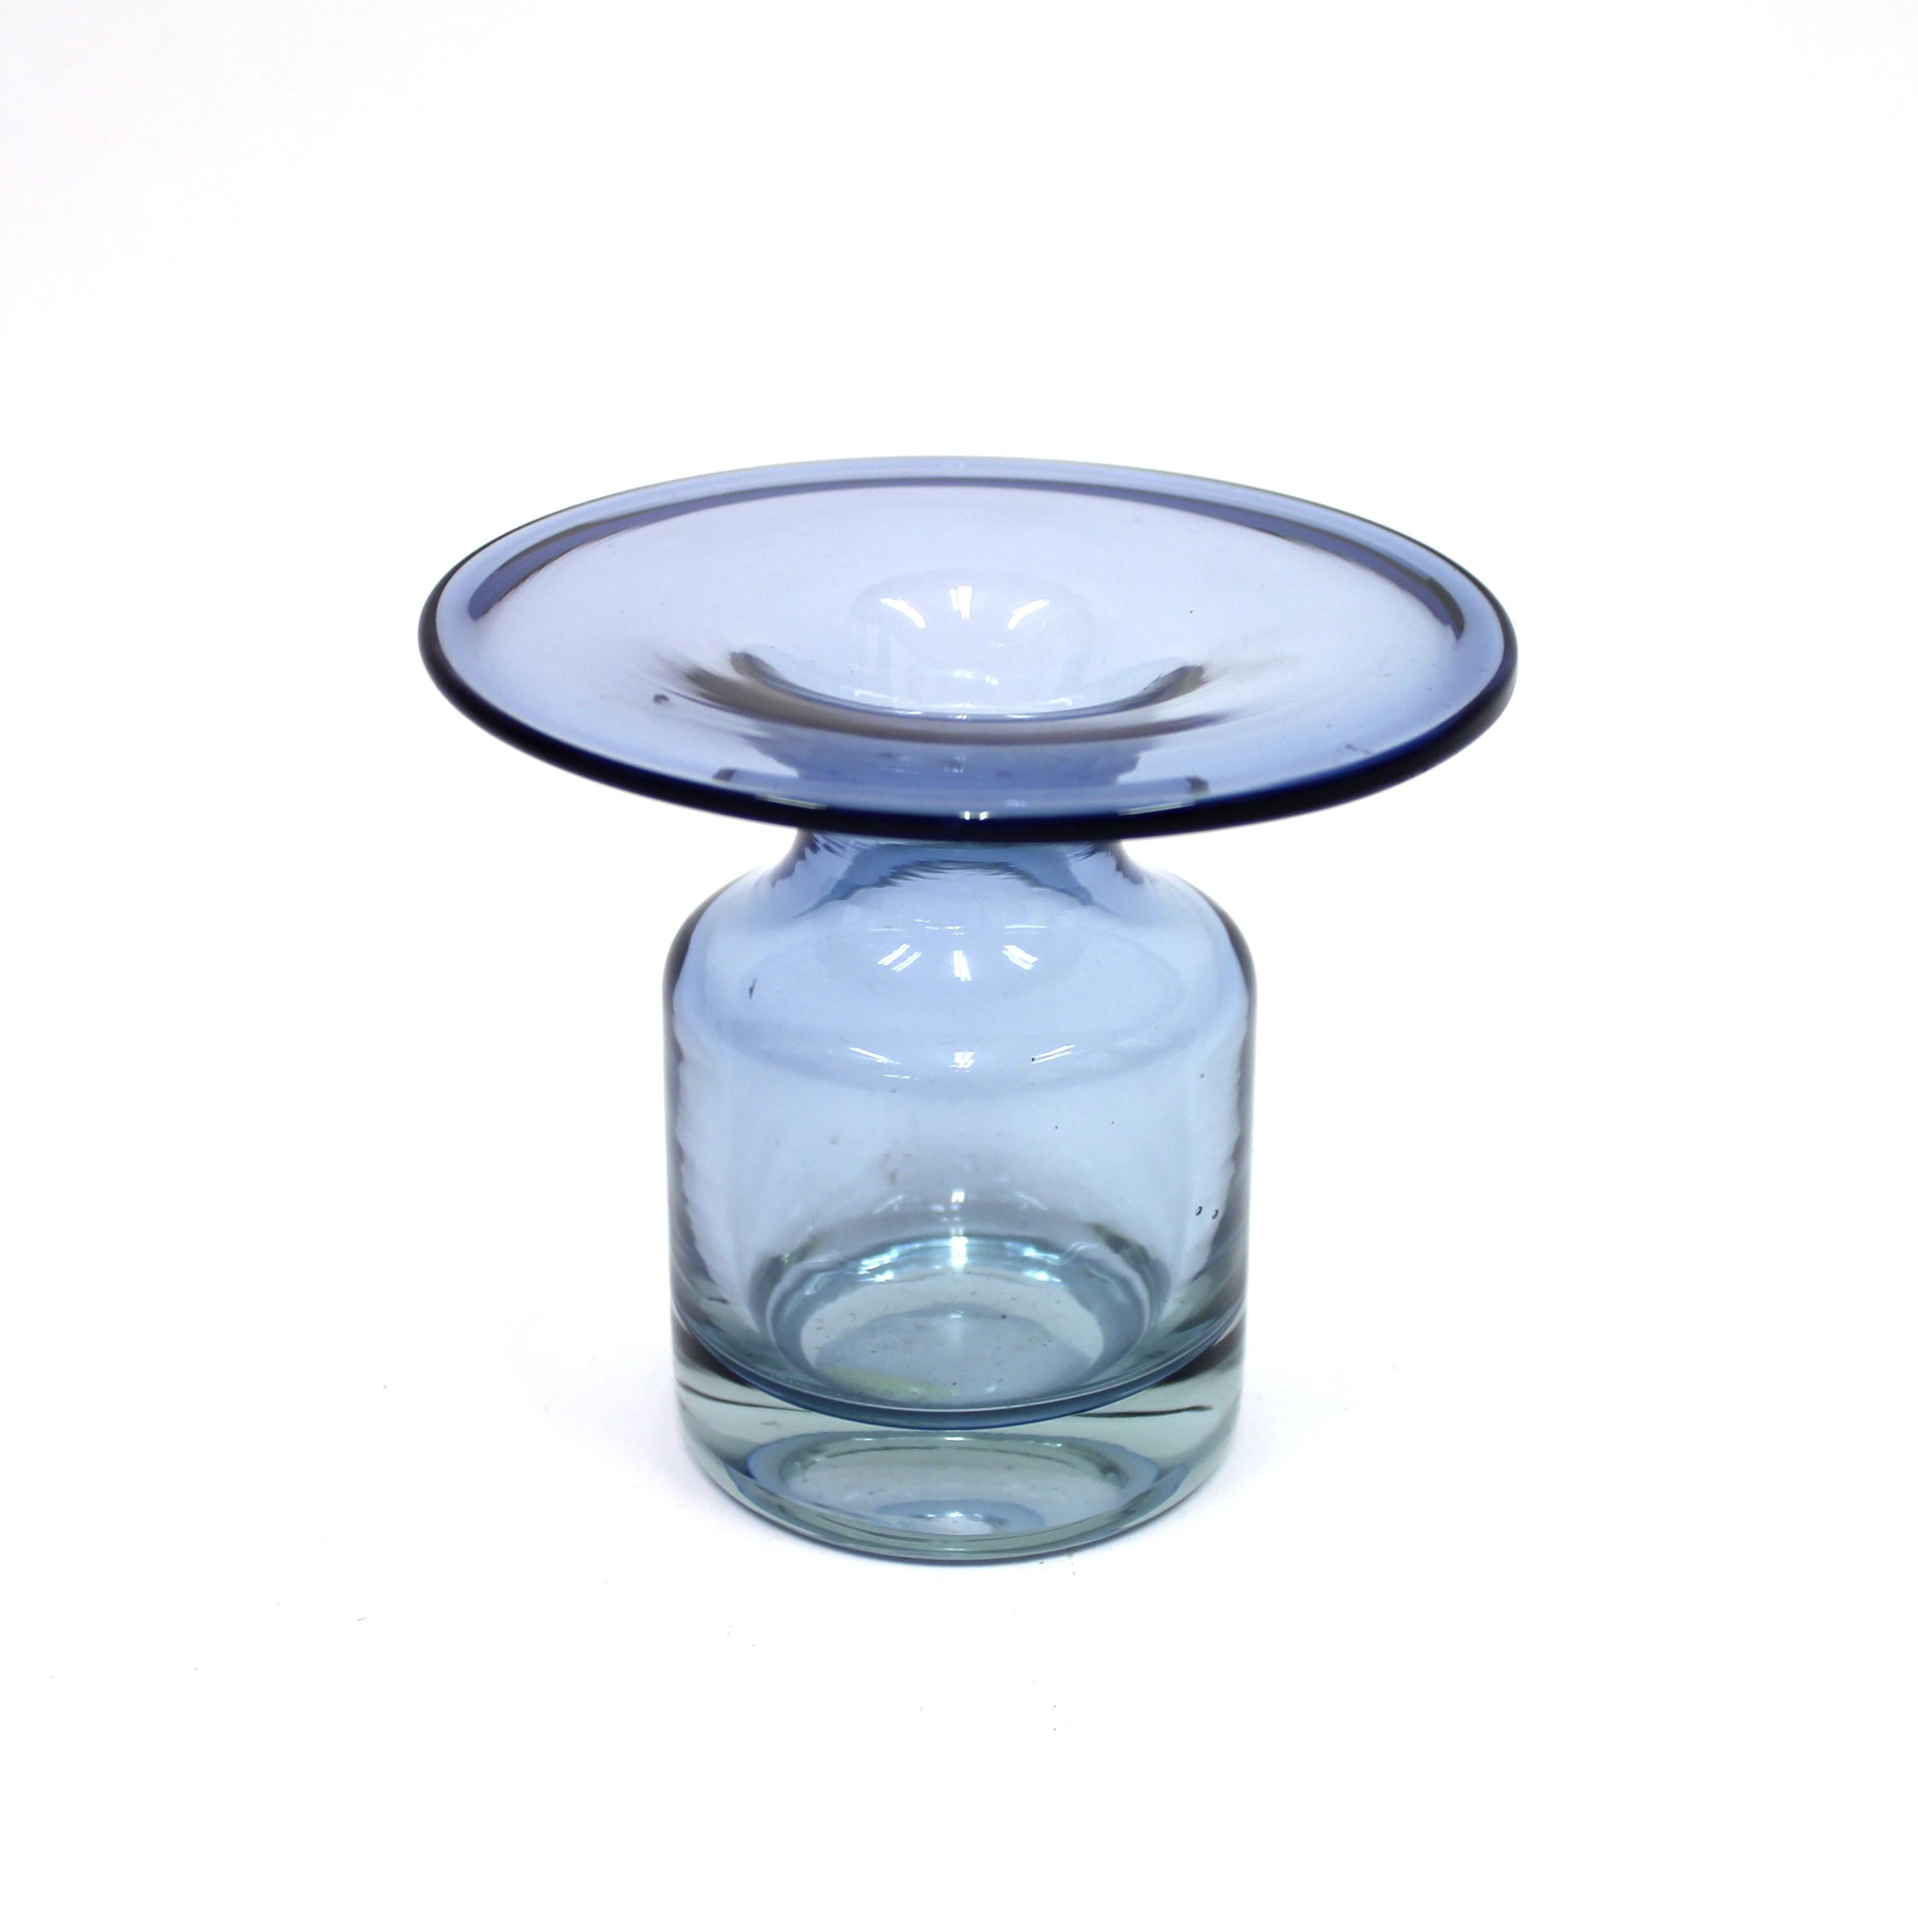 Small clear blue vase by Finnish master Tapio Wirkkala for Iittala. Made in the 1960s. Marked 